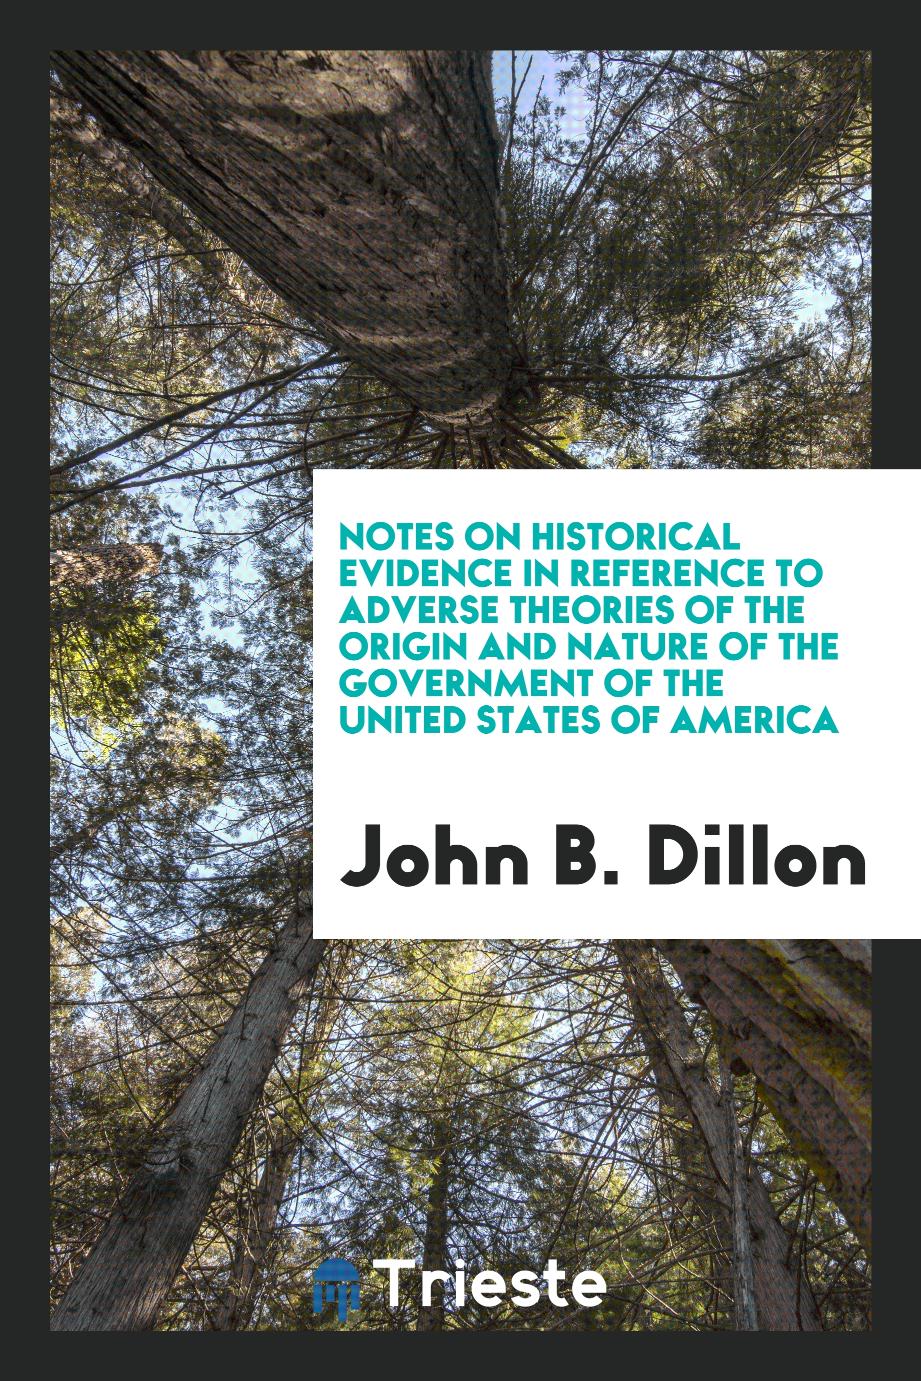 Notes on Historical Evidence in Reference to Adverse Theories of the Origin and Nature of the Government of the United States of America